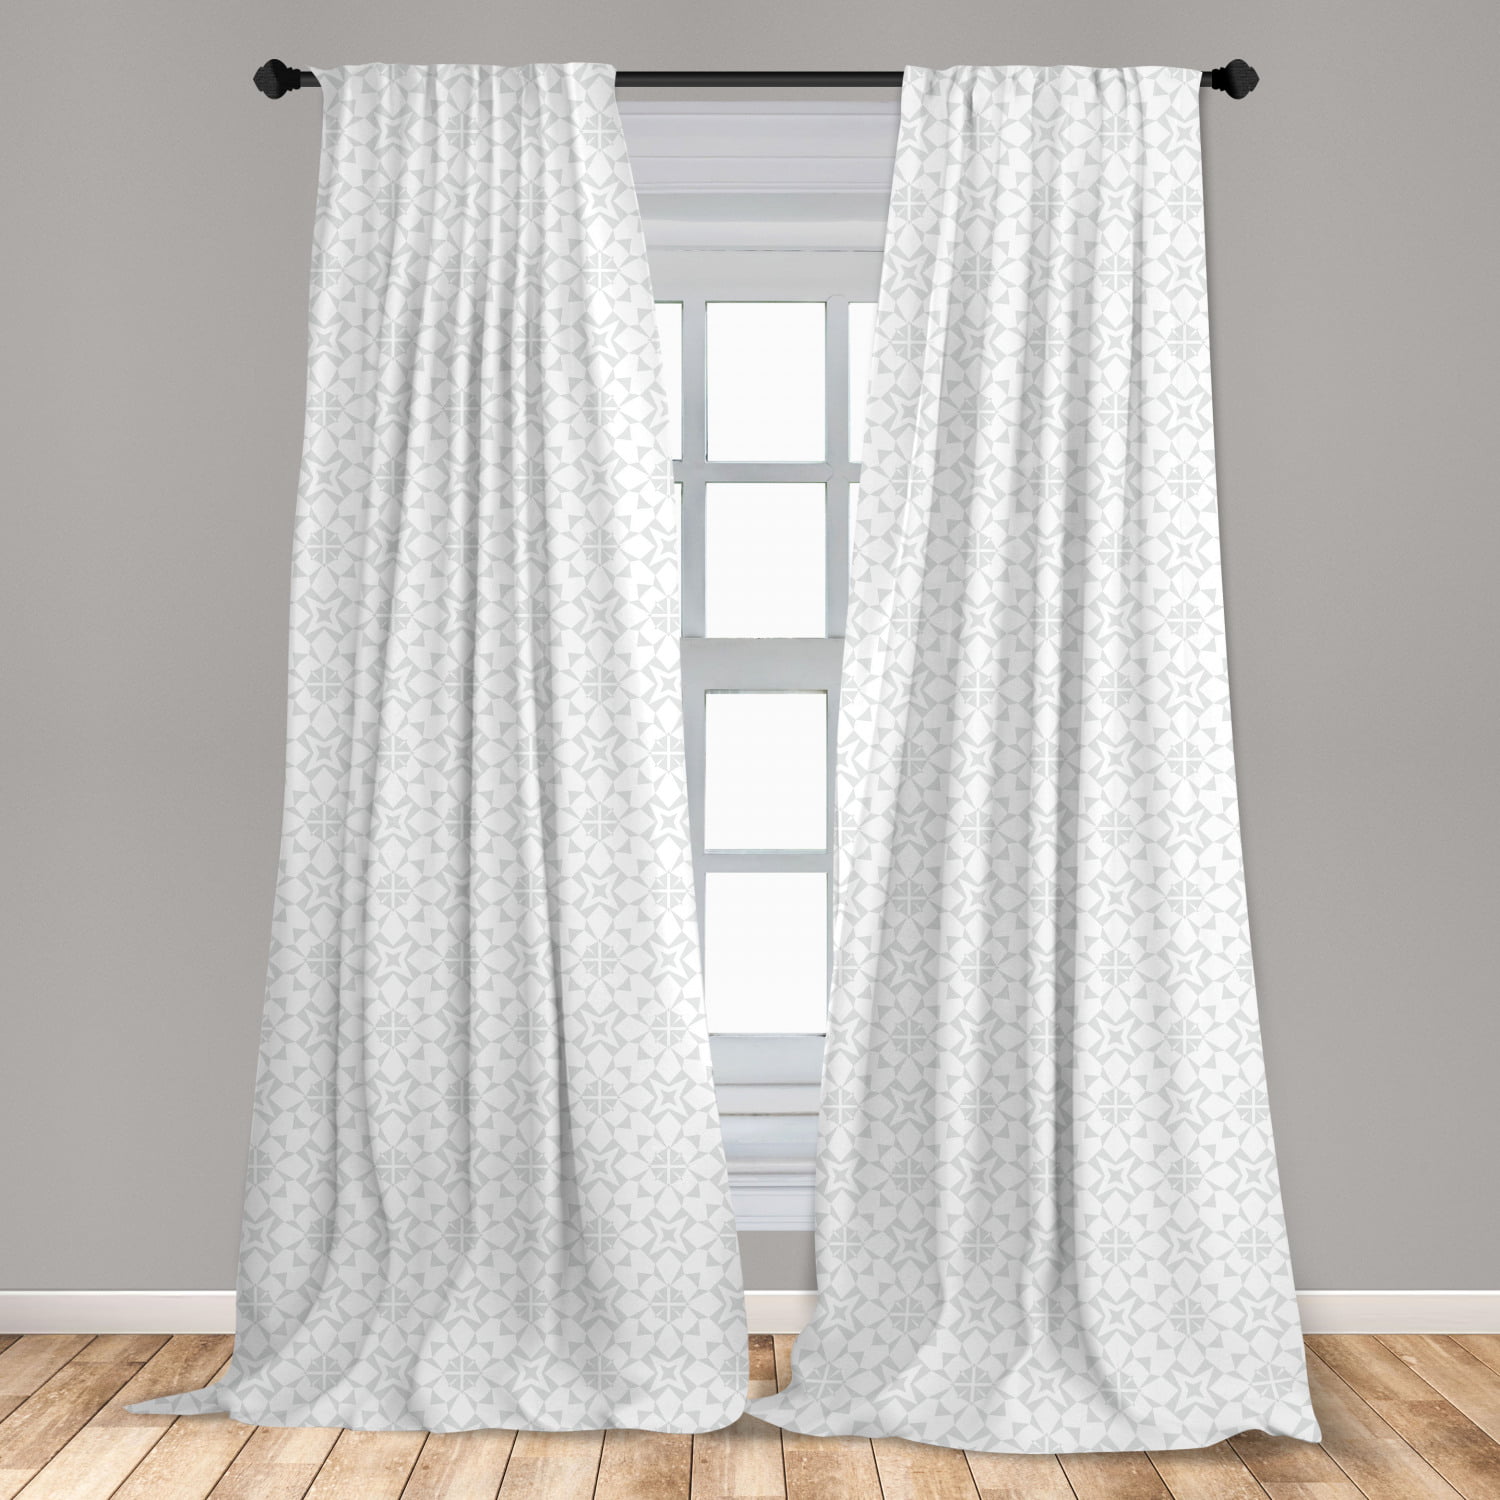 Set 2 Gray Grey White Damask Curtains Panels Drapes Pair 63 84 96 inch Grommet 